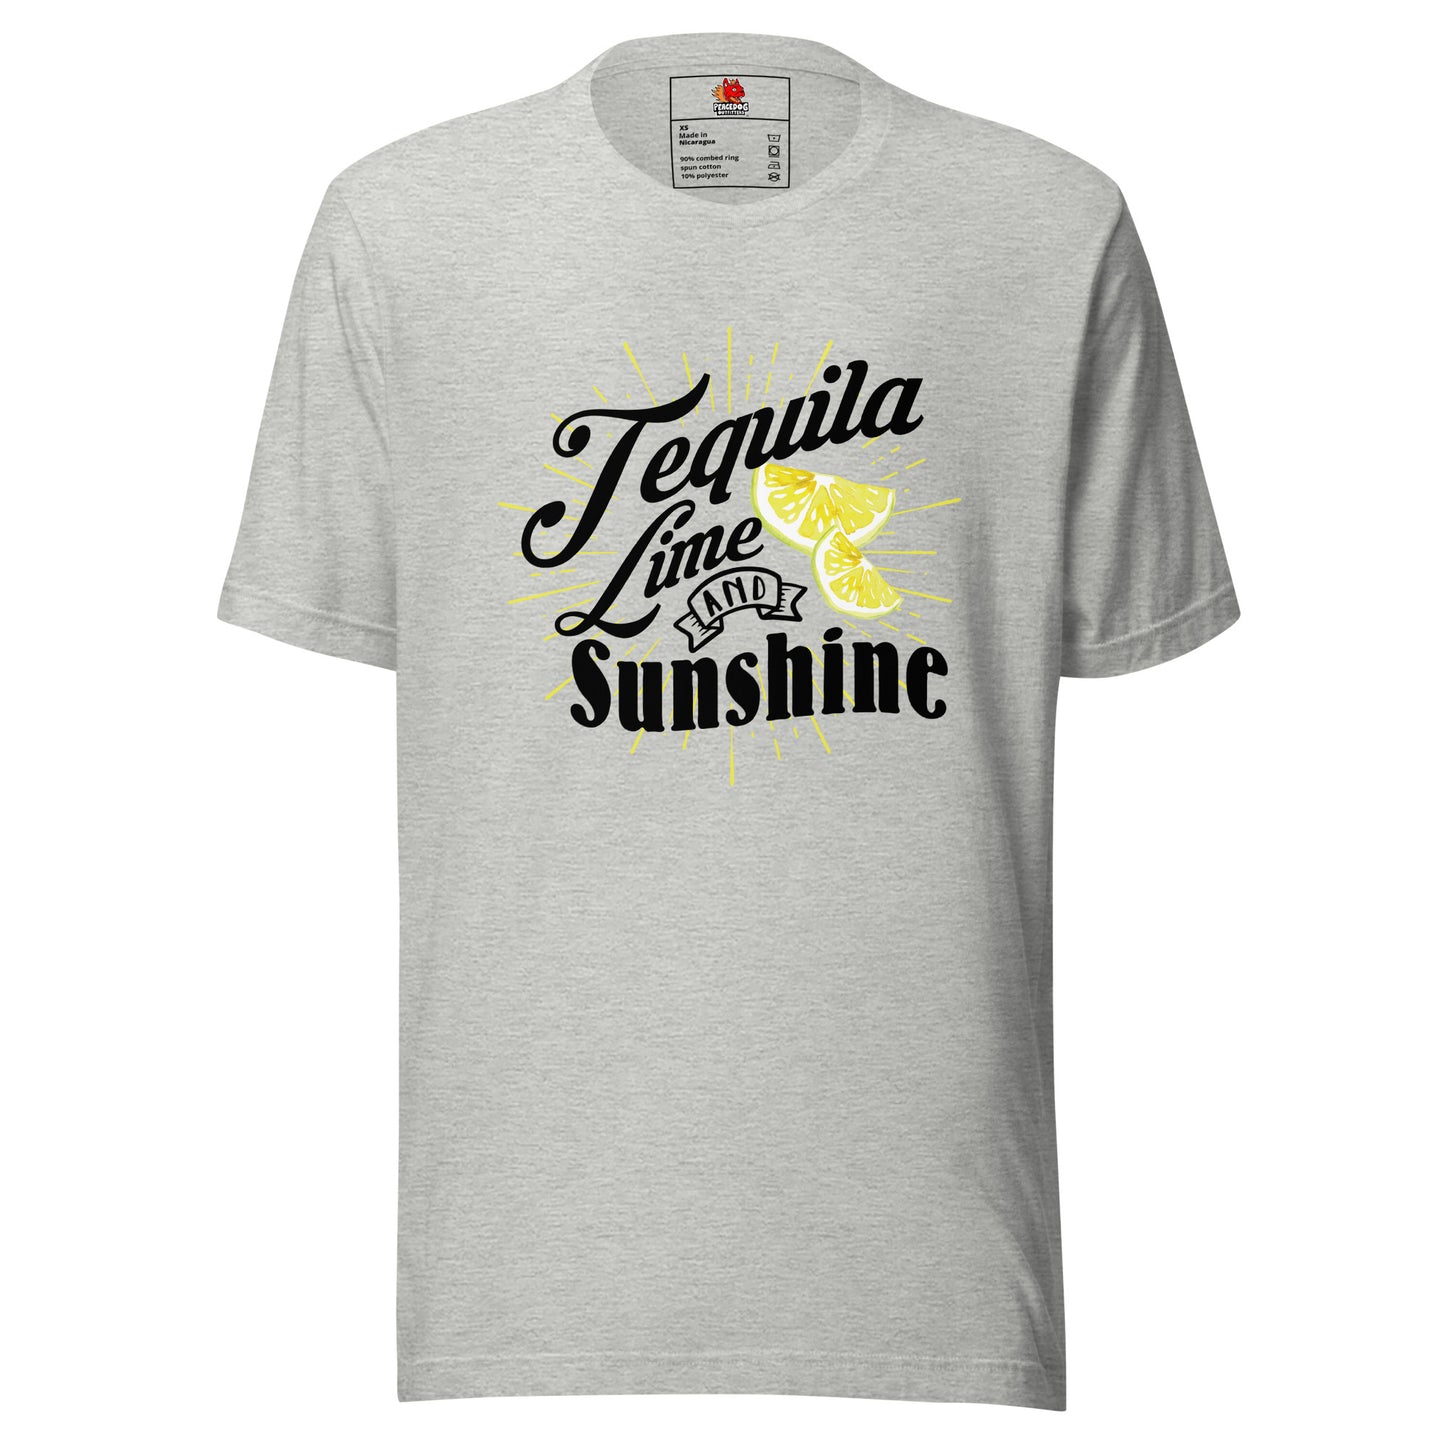 Tequila, Lime, and Sunshine T-shirt